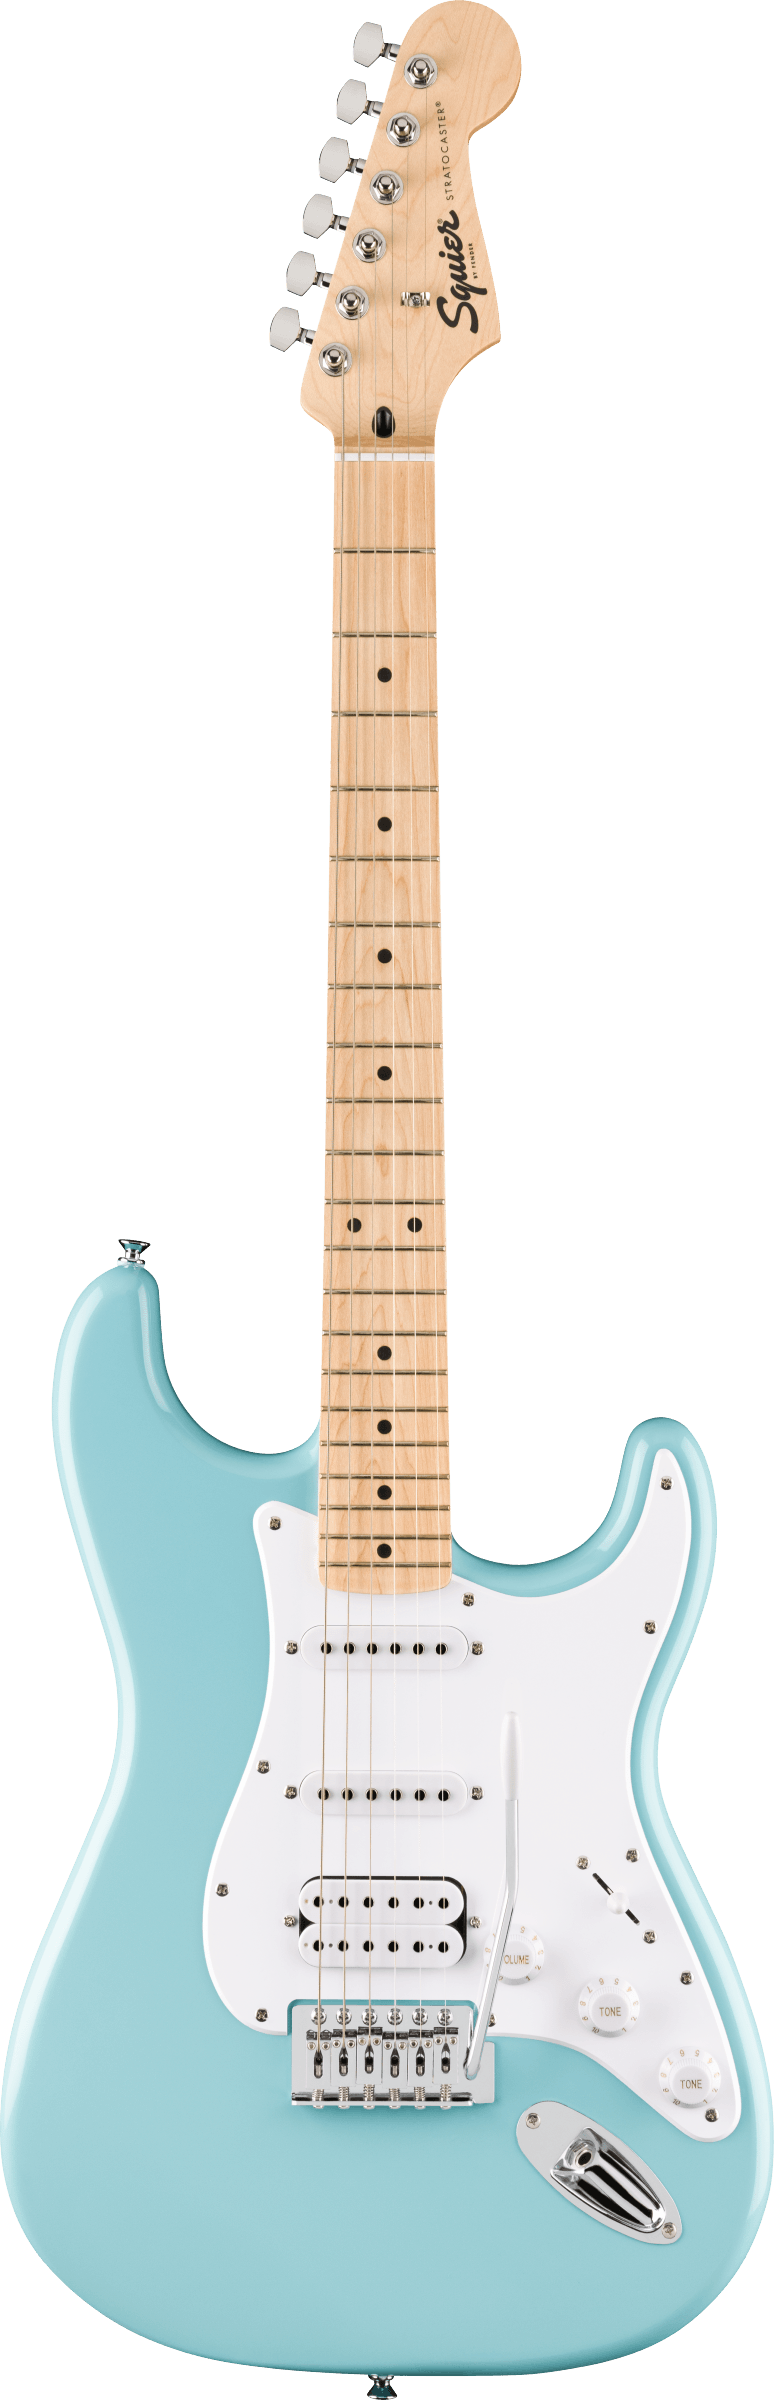 Squier FSR Squier Sonic® Stratocaster® HSS, Maple Fingerboard, White Pickguard, Tropical Turquoise